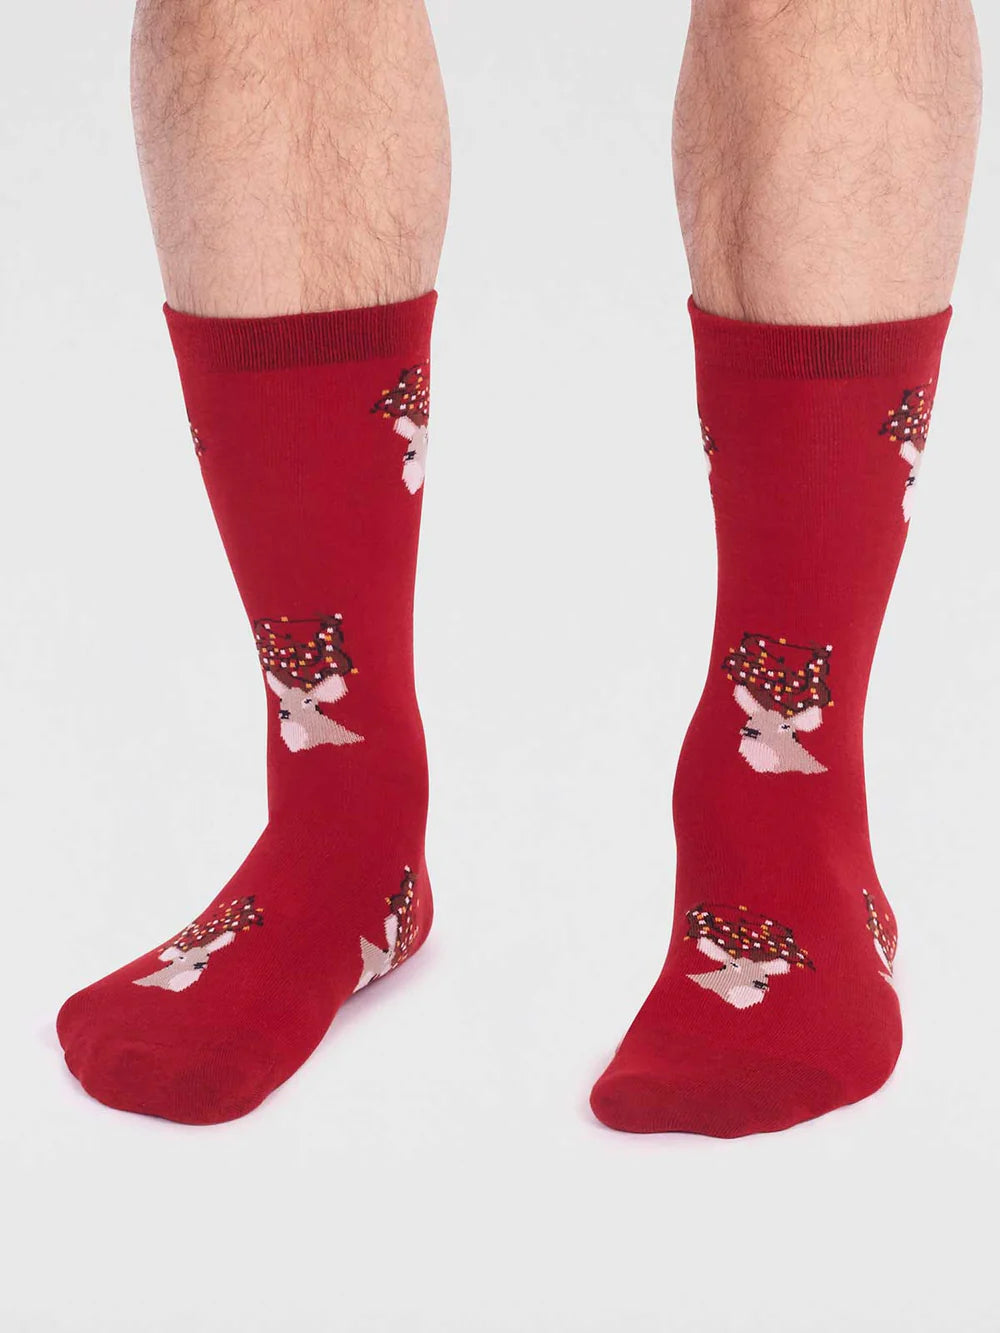 Thought Celyn GOTS Organic Cotton Christmas Stag Socks Bright Red 7-11